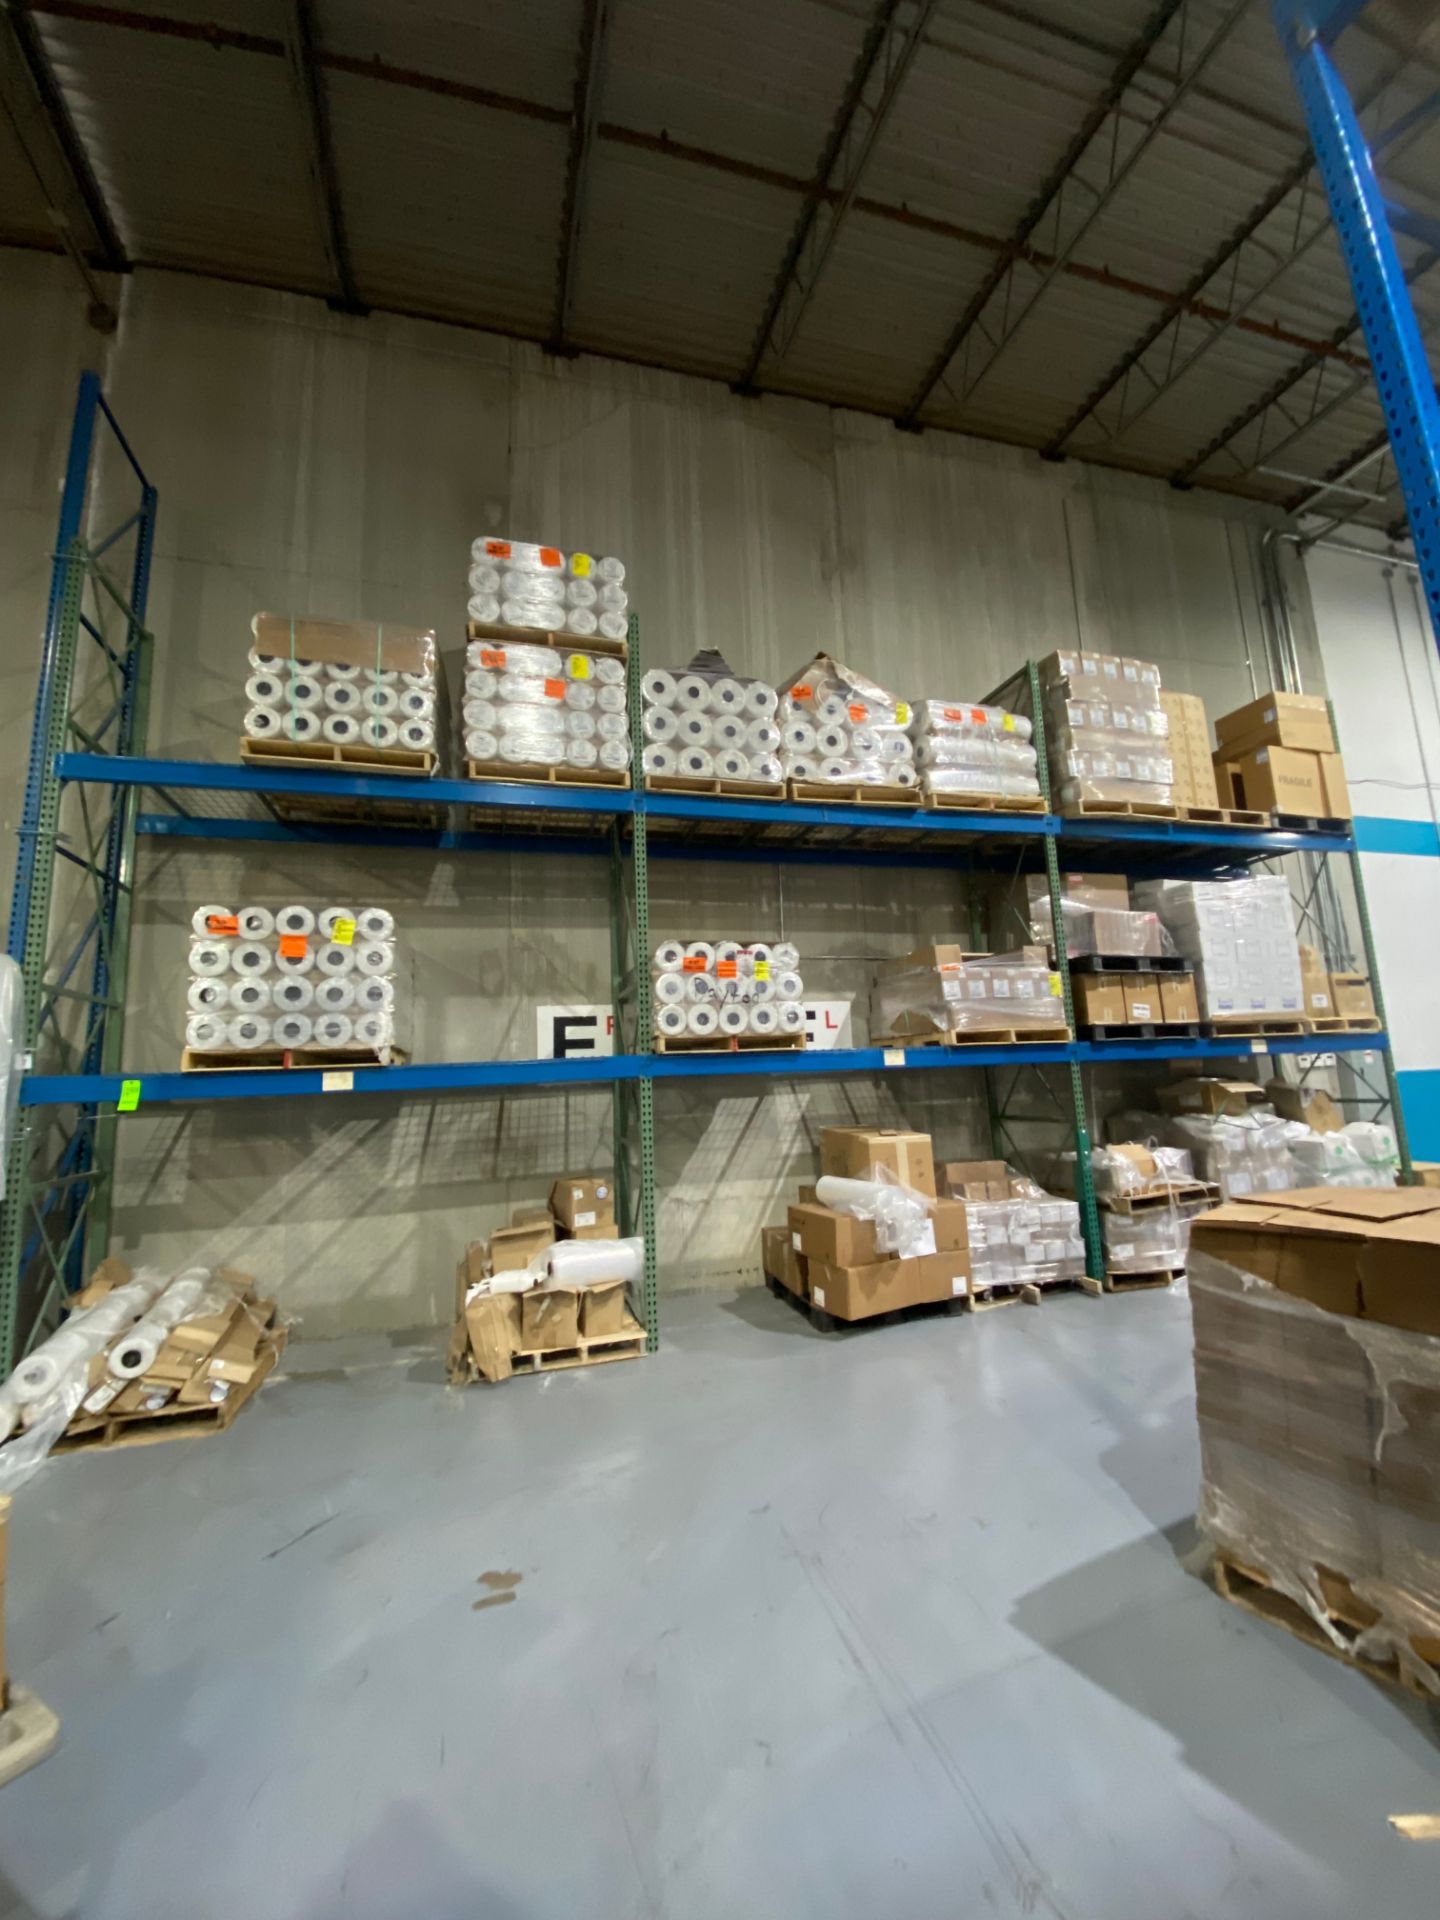 (9) Sections of Pallet Racking with Wire Racks, Each Section Approx. 10.5 feet Long x 65 Inches High